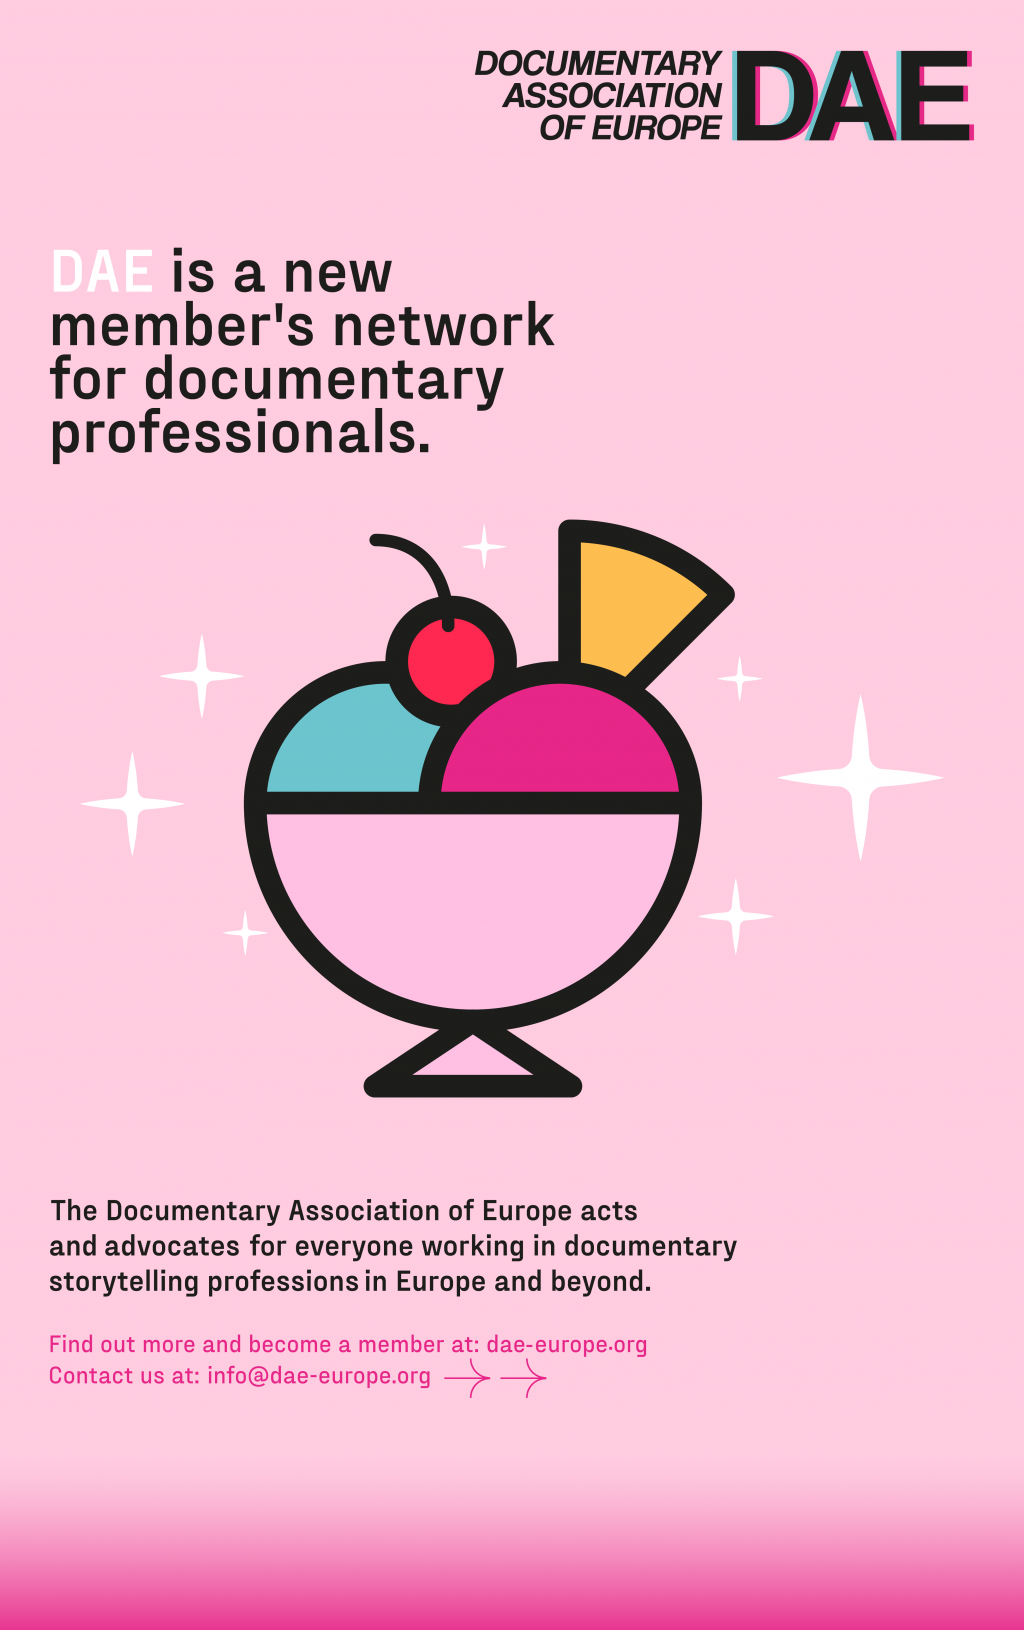 Ad of Documentary Association of Europe